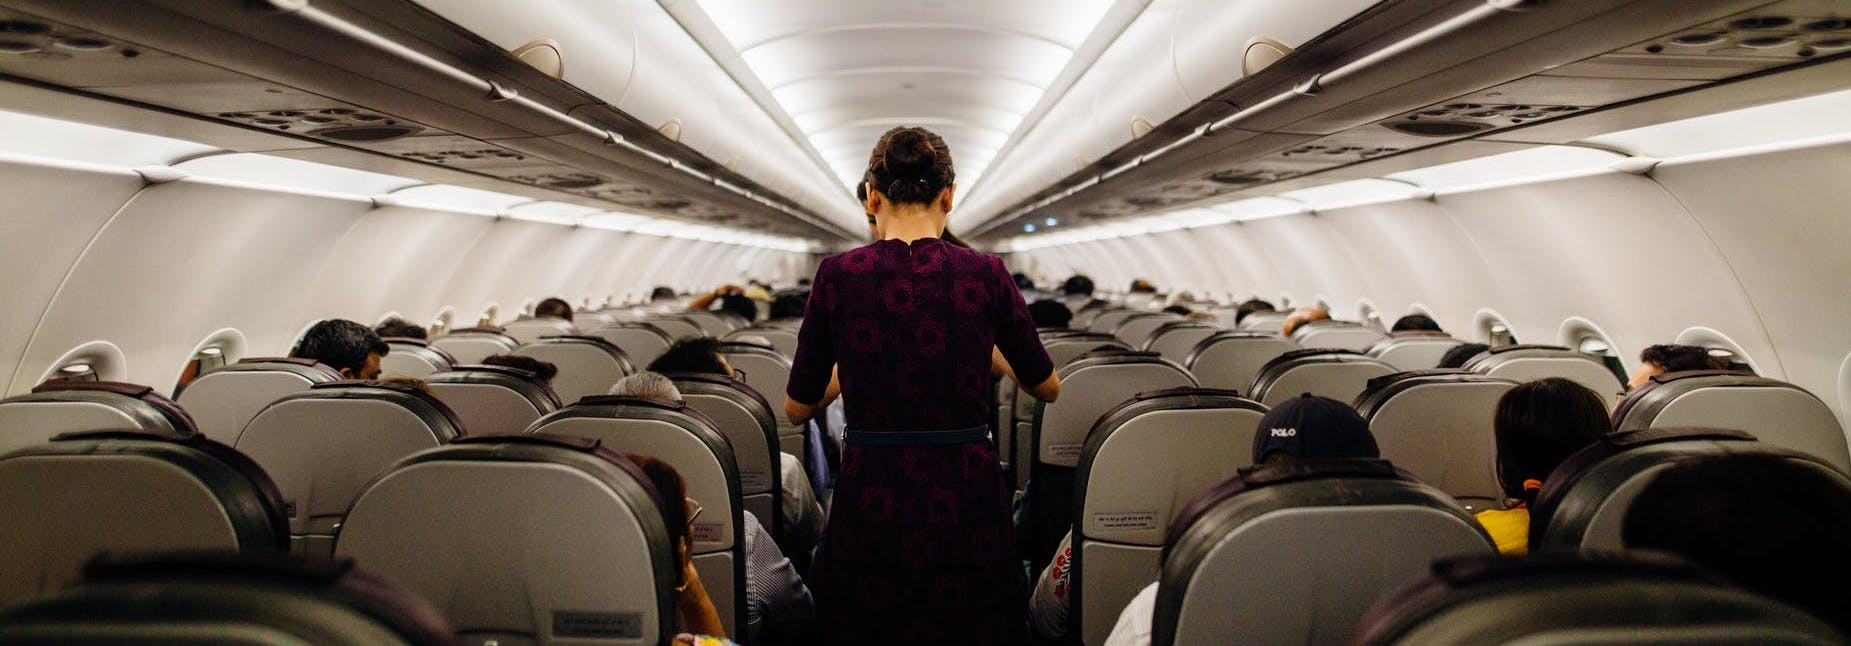 A flight attendant standing in the aisle of a relatively full airplane